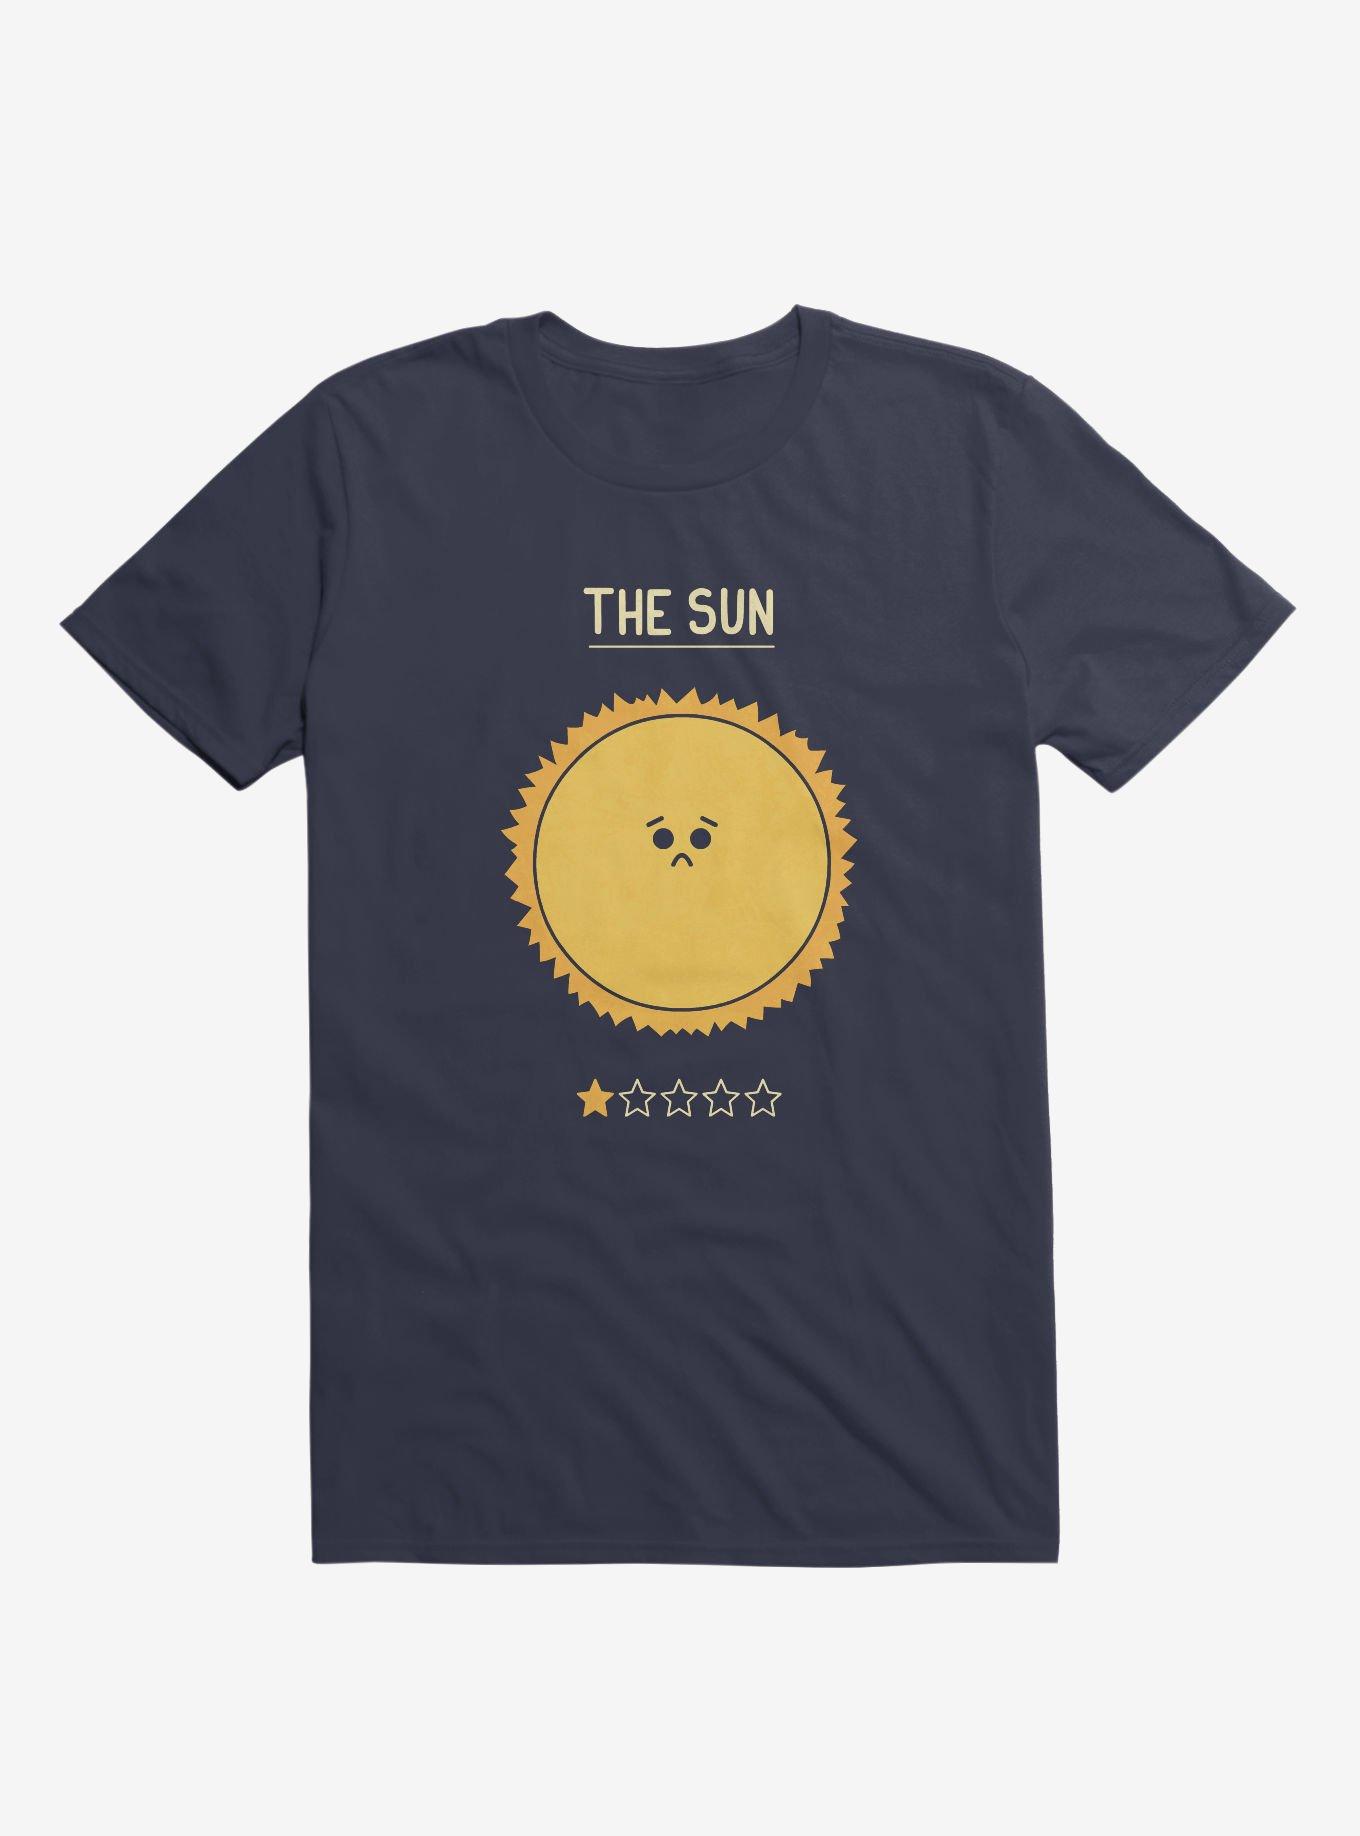 The Sun One Star Rating Navy Blue T-Shirt, NAVY, hi-res